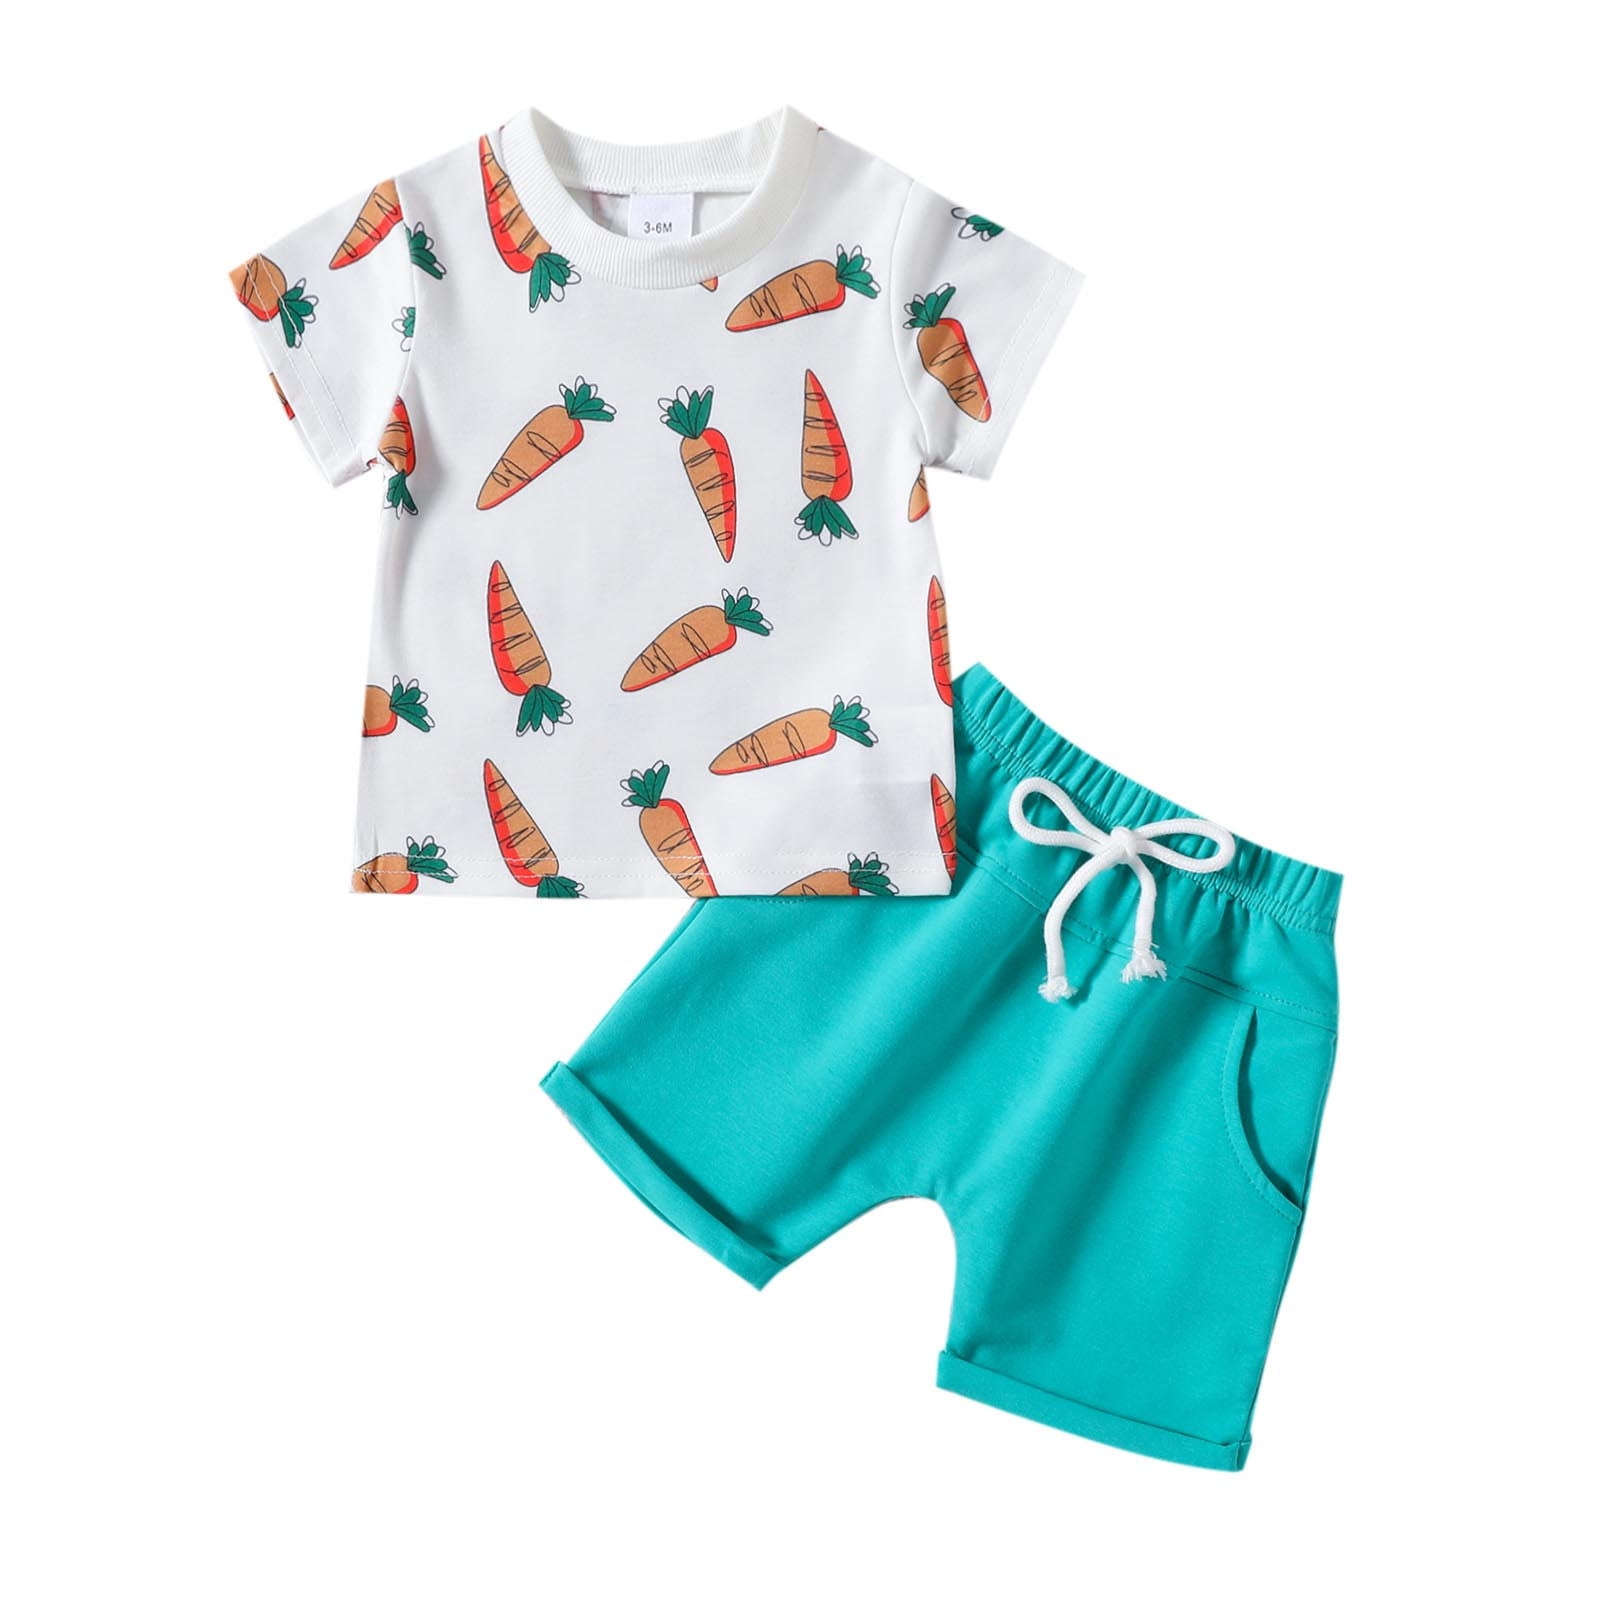 gdxvjhbj Little Girls Short Sets Baby Girl Summer Clothes Outfits ...